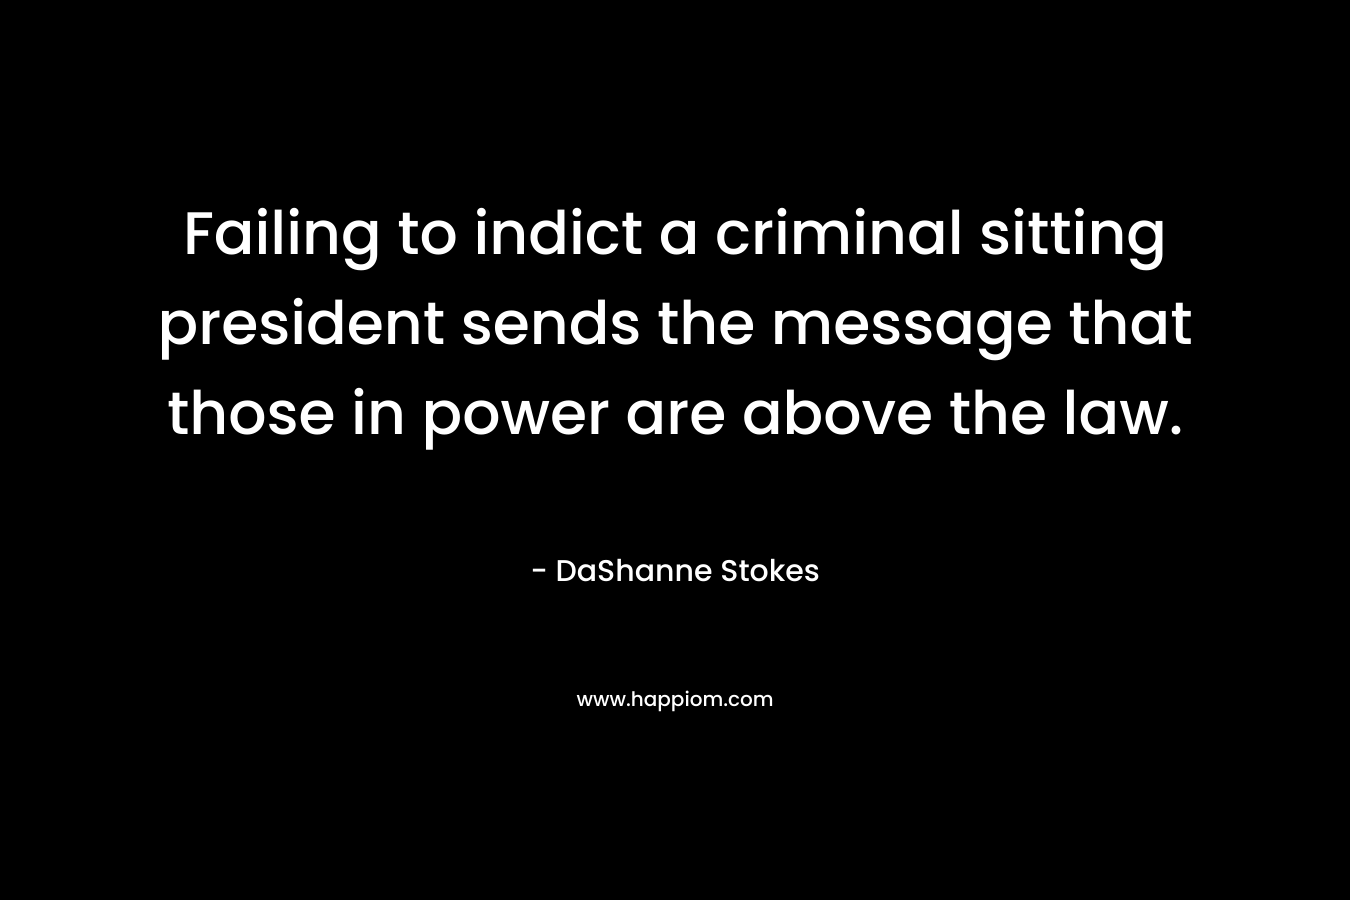 Failing to indict a criminal sitting president sends the message that those in power are above the law.